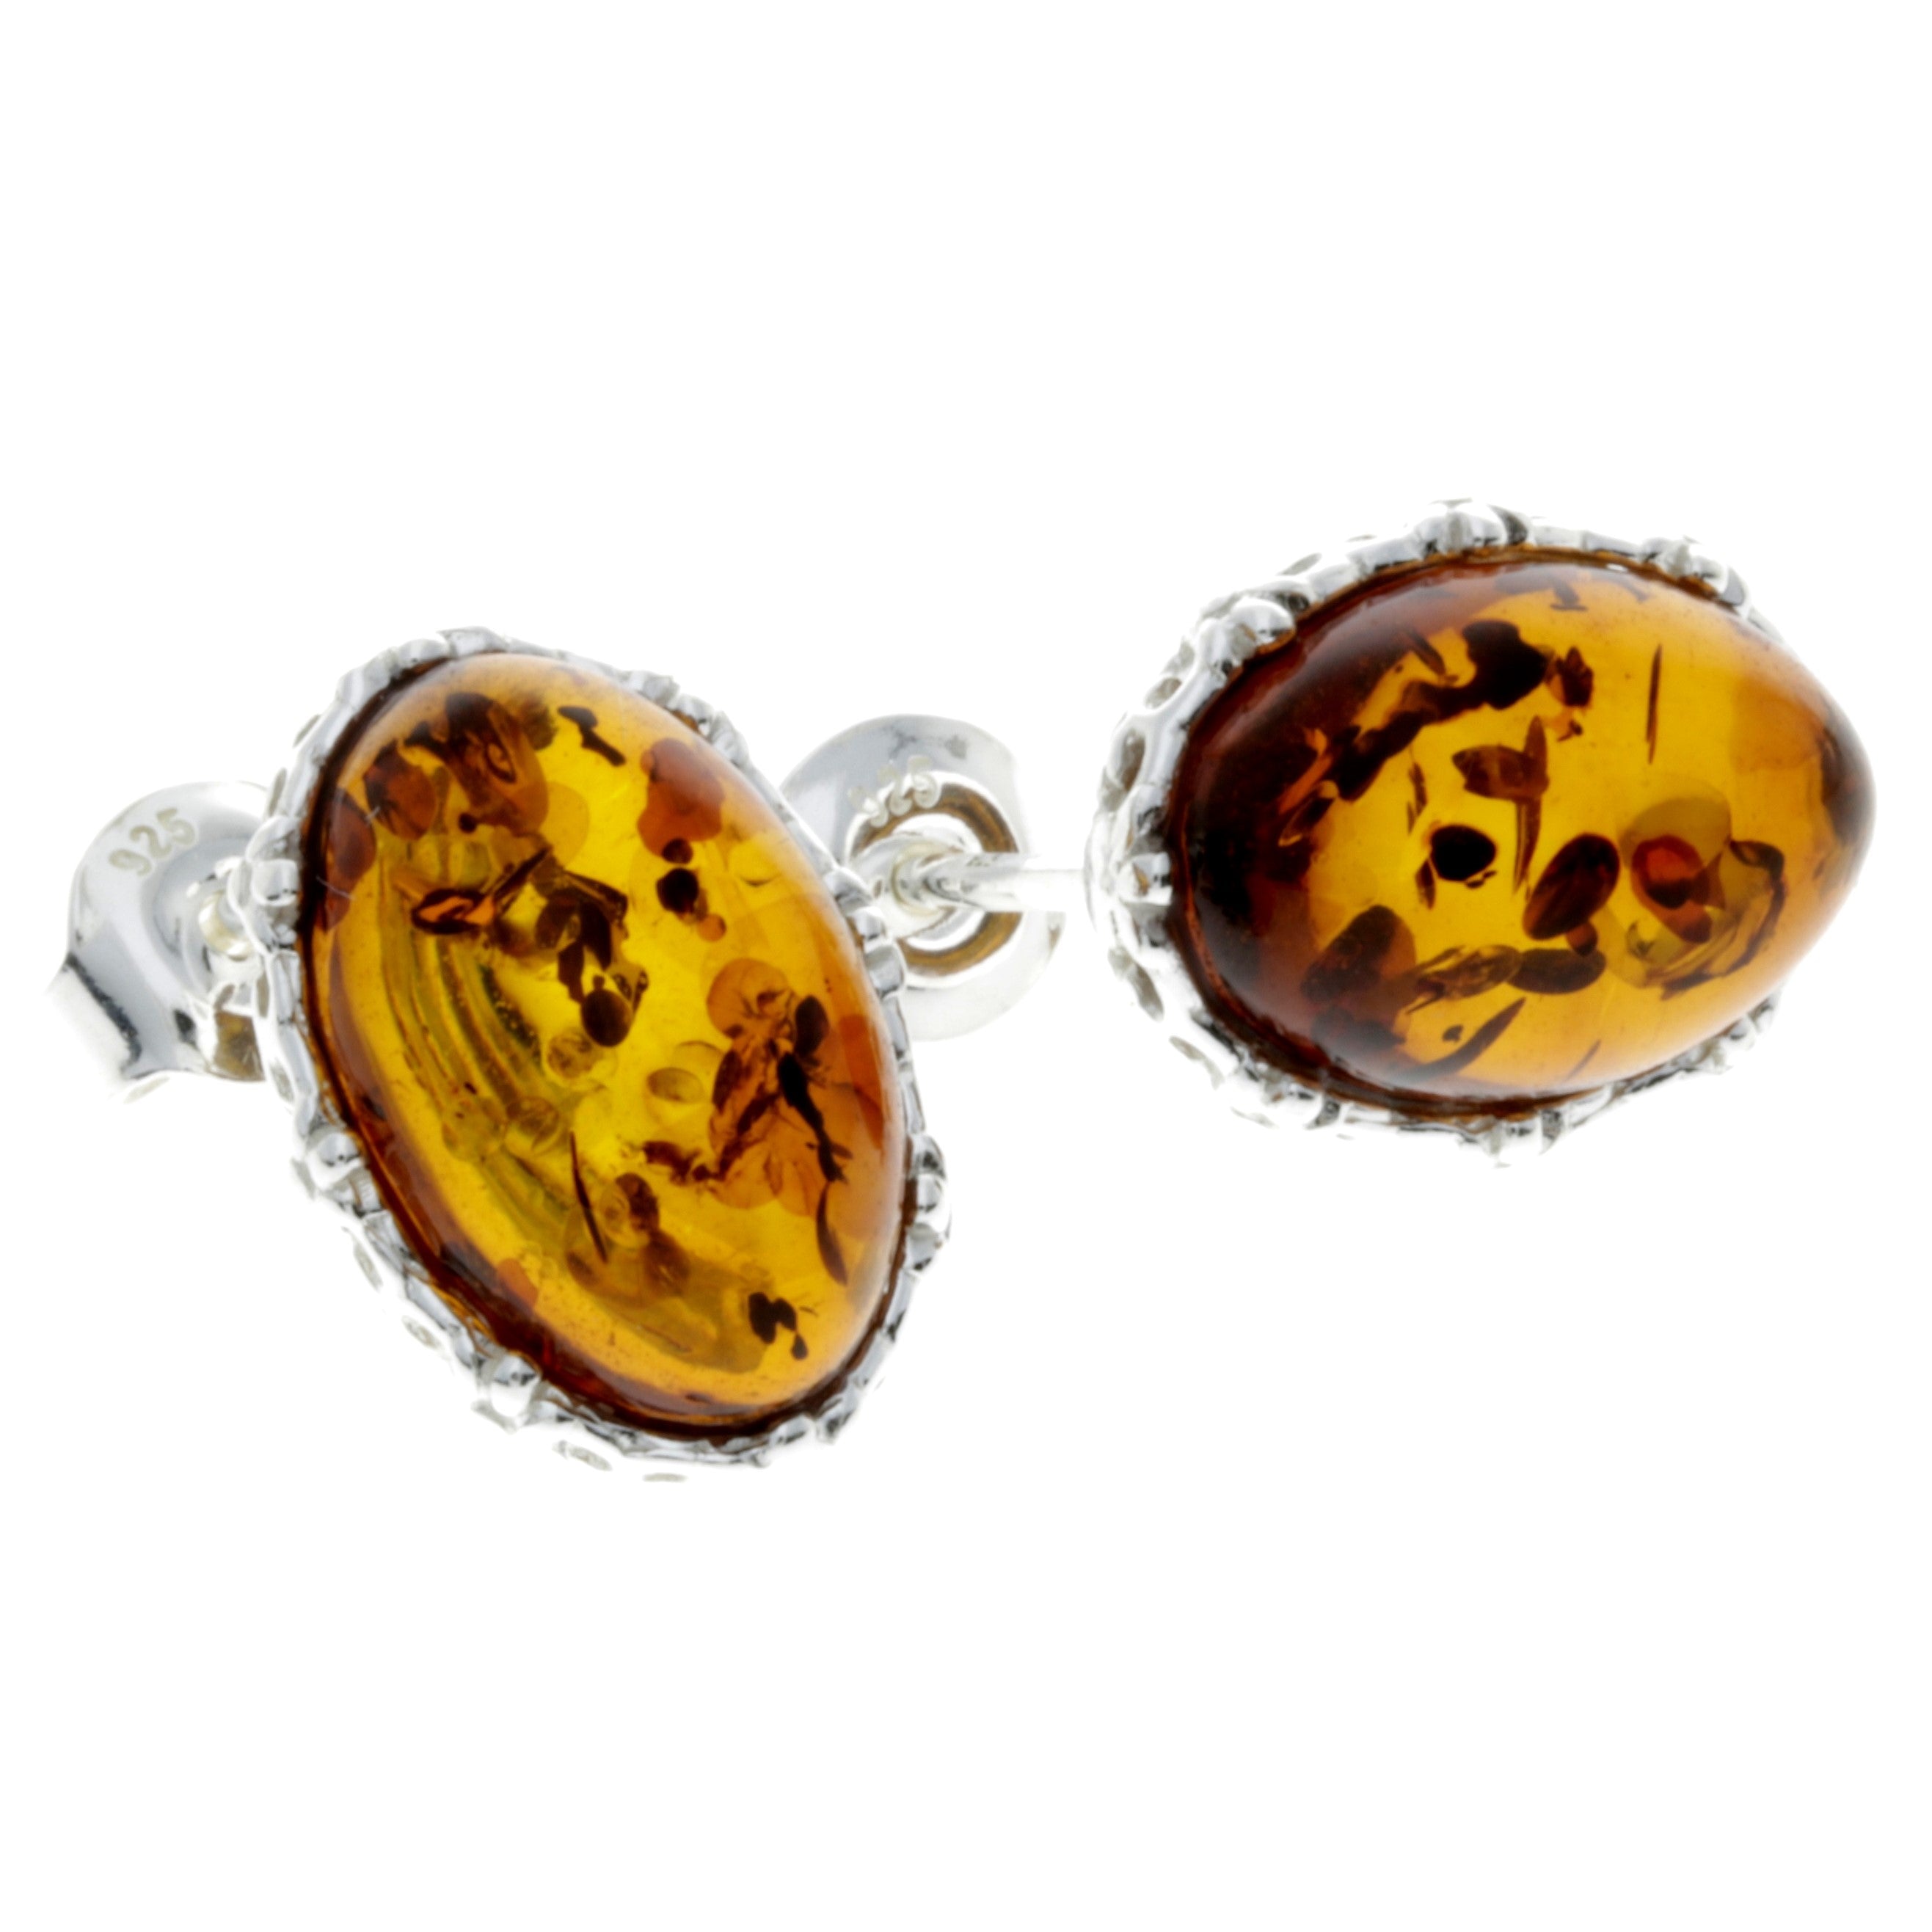 925 Sterling Silver & Genuine Baltic Amber Classic Oval Studs Earrings - M650